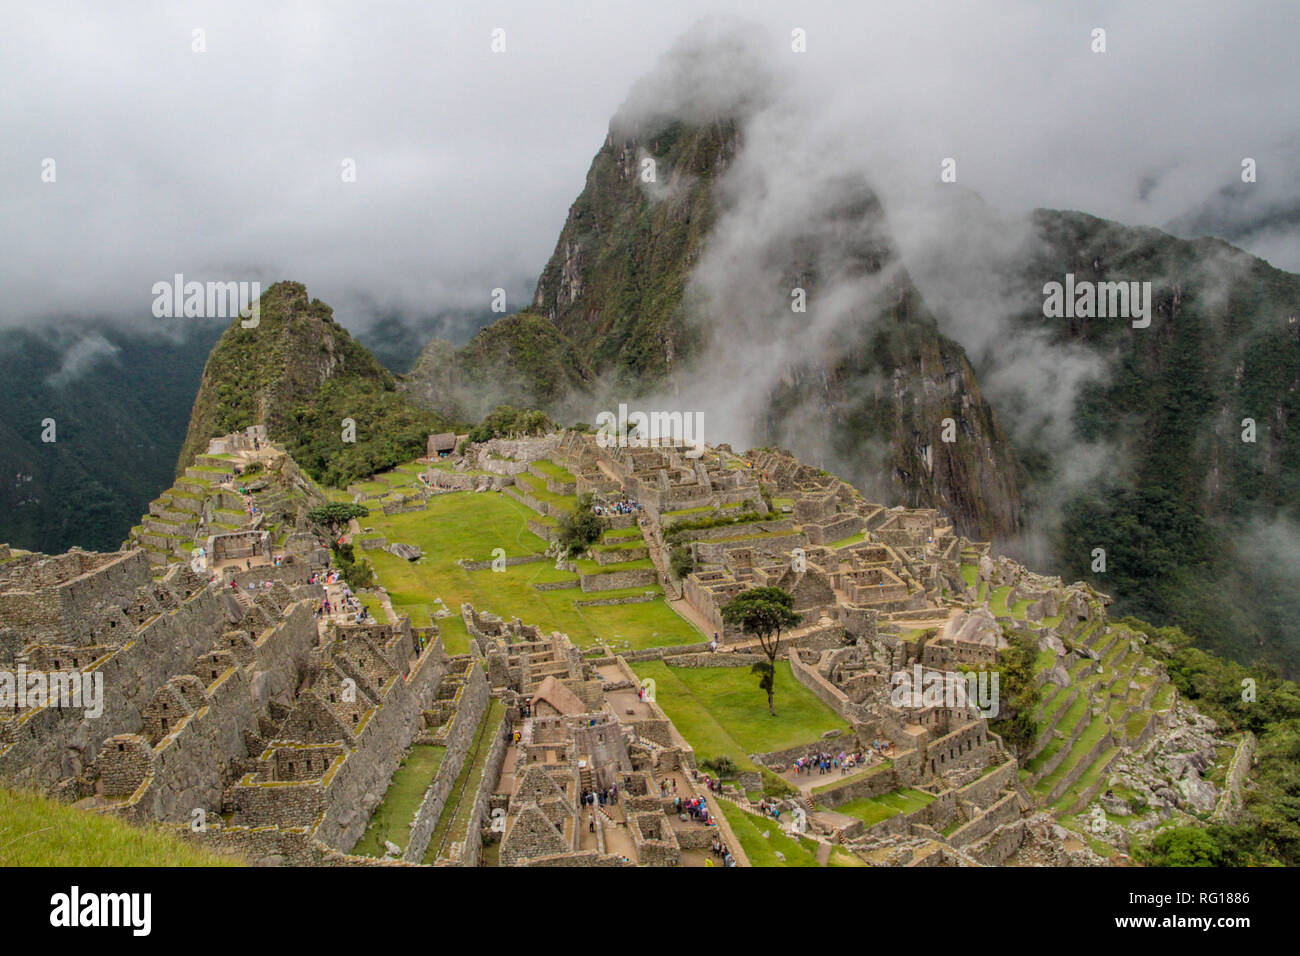 Panoramic view of Machu Picchu, the world famous ancient inca city, hidden in the cloud forest mountains of Peru in South america Stock Photo